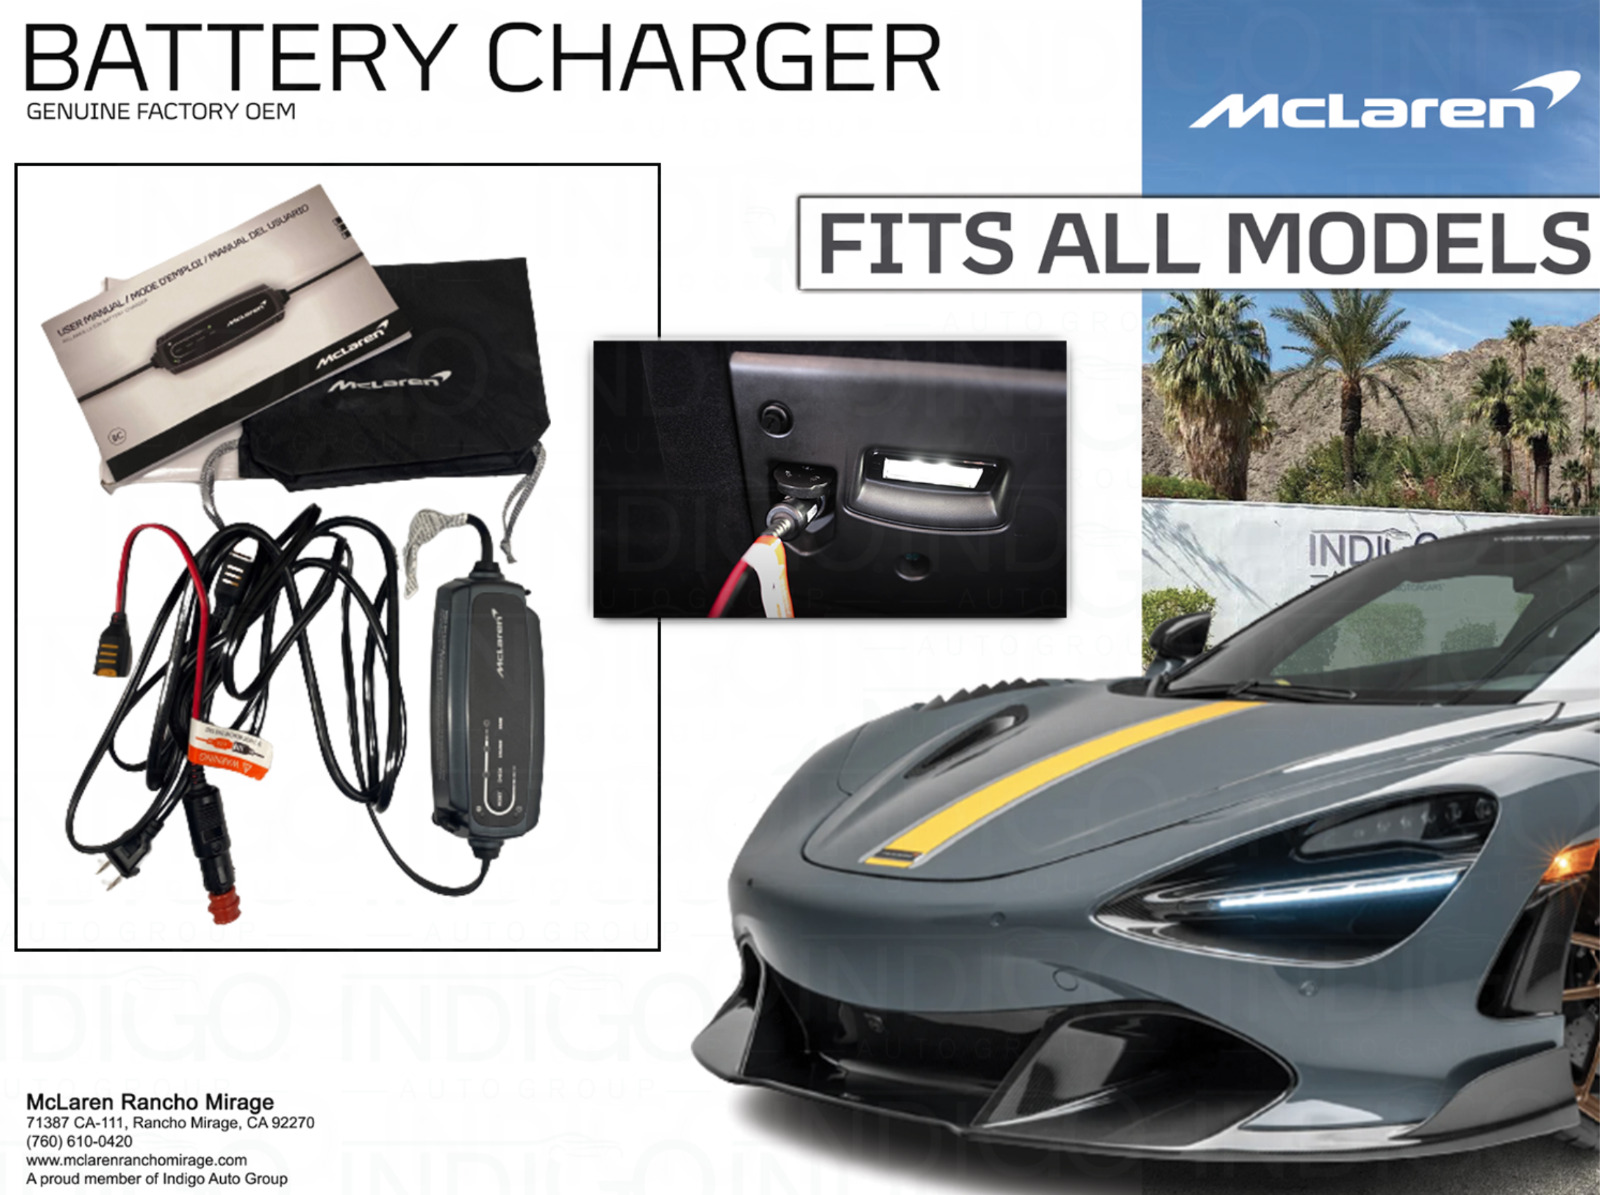 Brand New McLaren Li-ion Battery Charger Factory OEM - 1211M0989CP